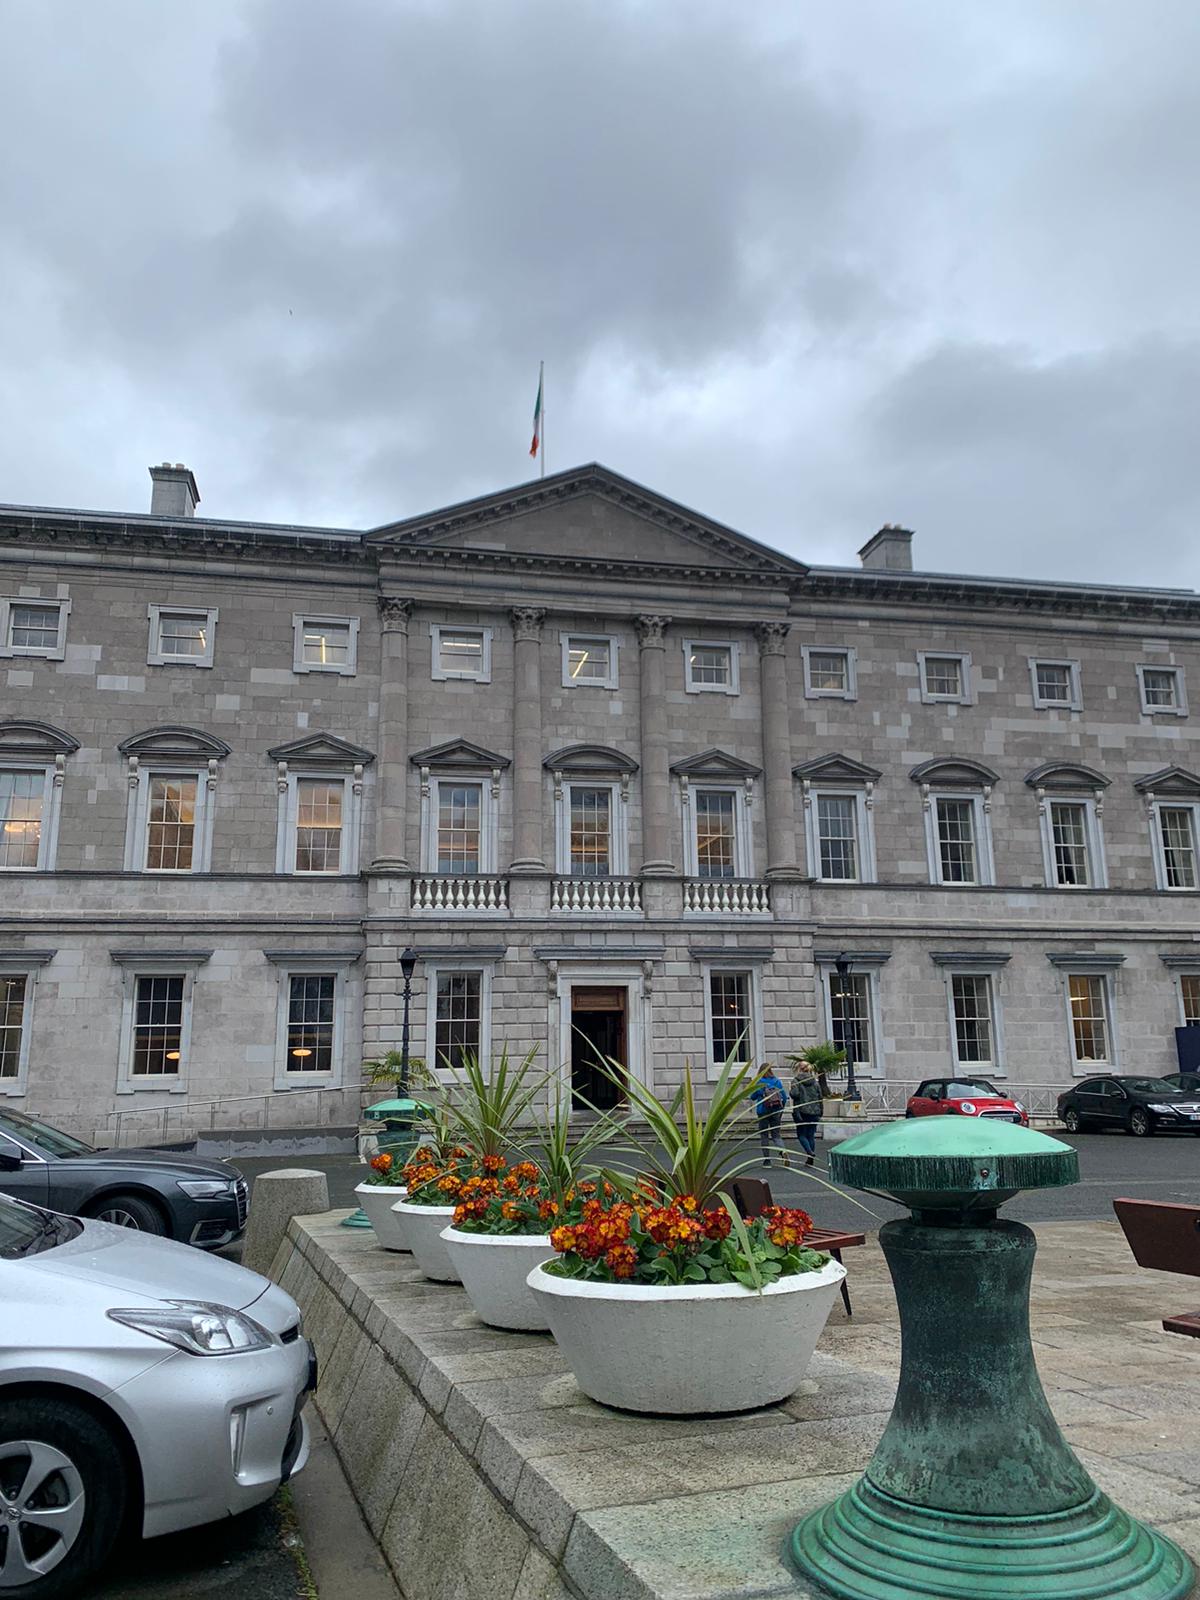 Outside of Leinster House. The building is classical looking and has round pots of flowers decorating the walkway to the door.